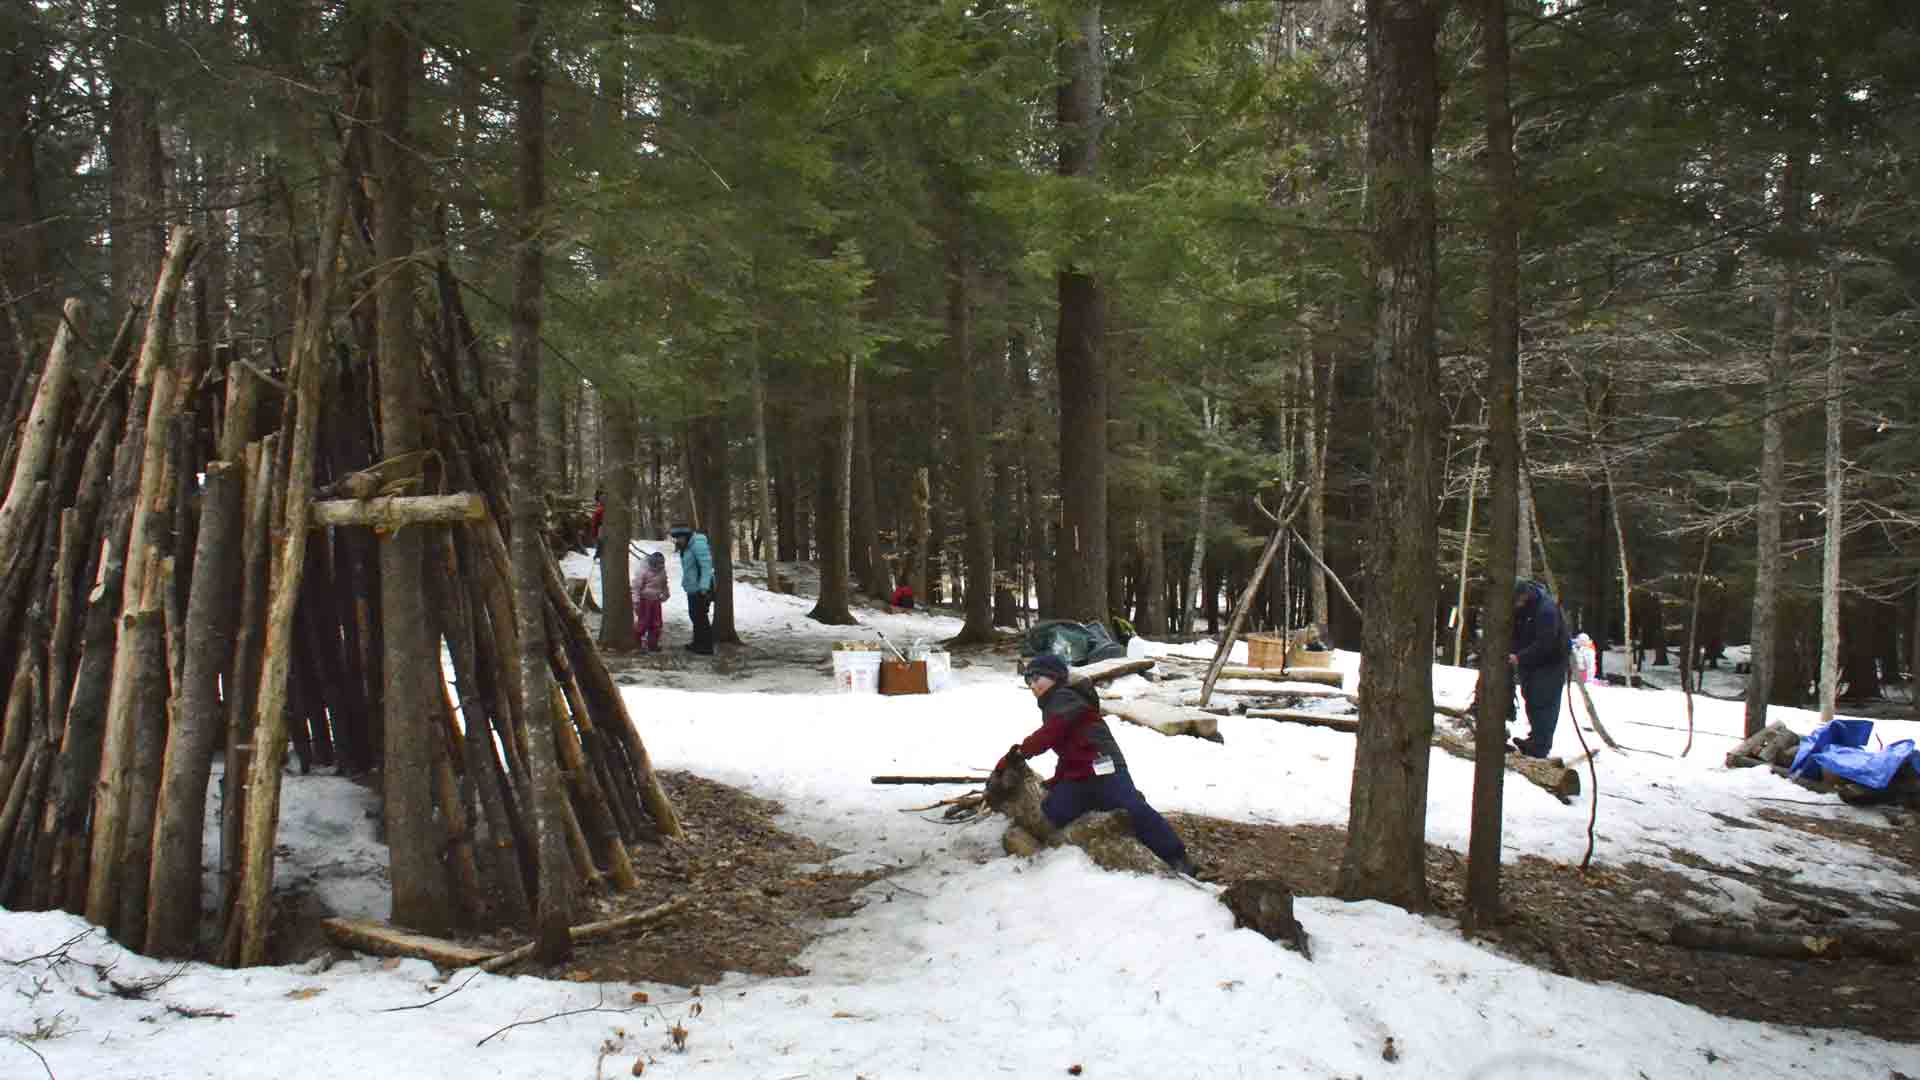 Students and teachers at the Forest Monday home site they’ve built in the woods next to their school in Quechee, Vermont. 